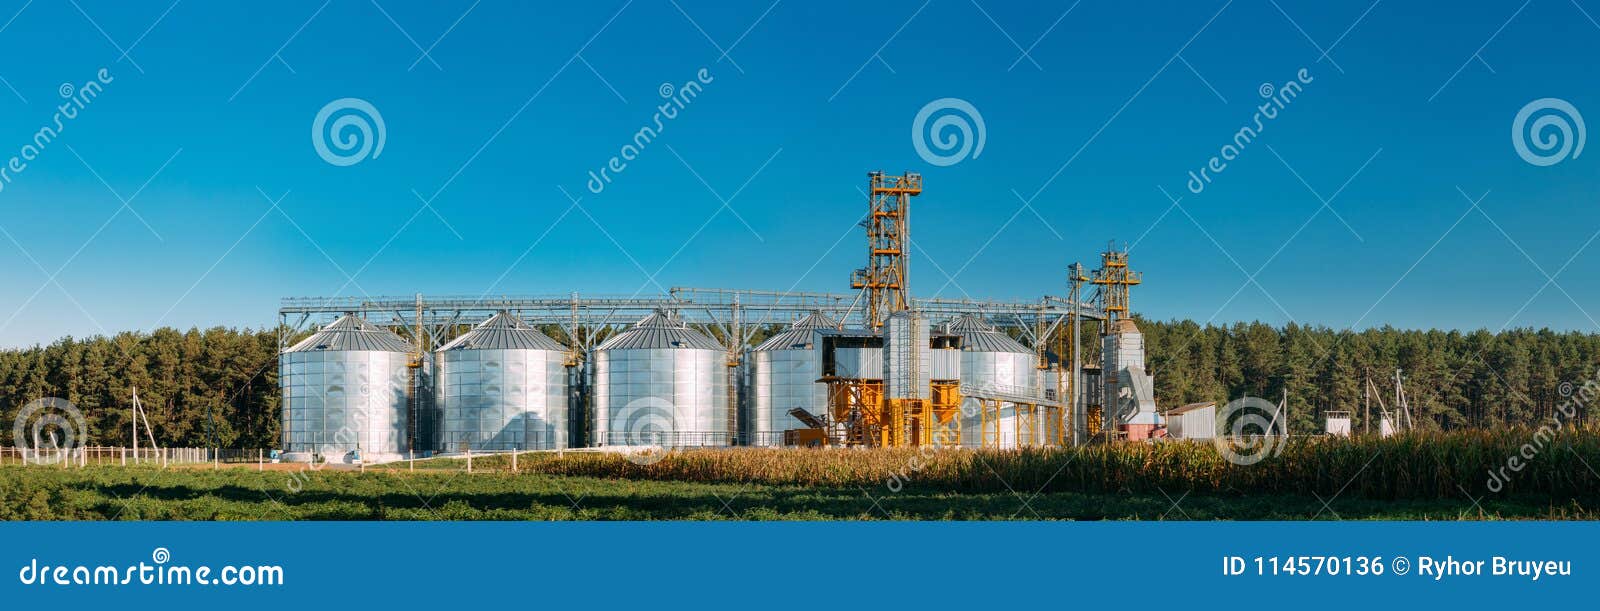 modern granary, grain-drying complex, commercial grain or seed silos